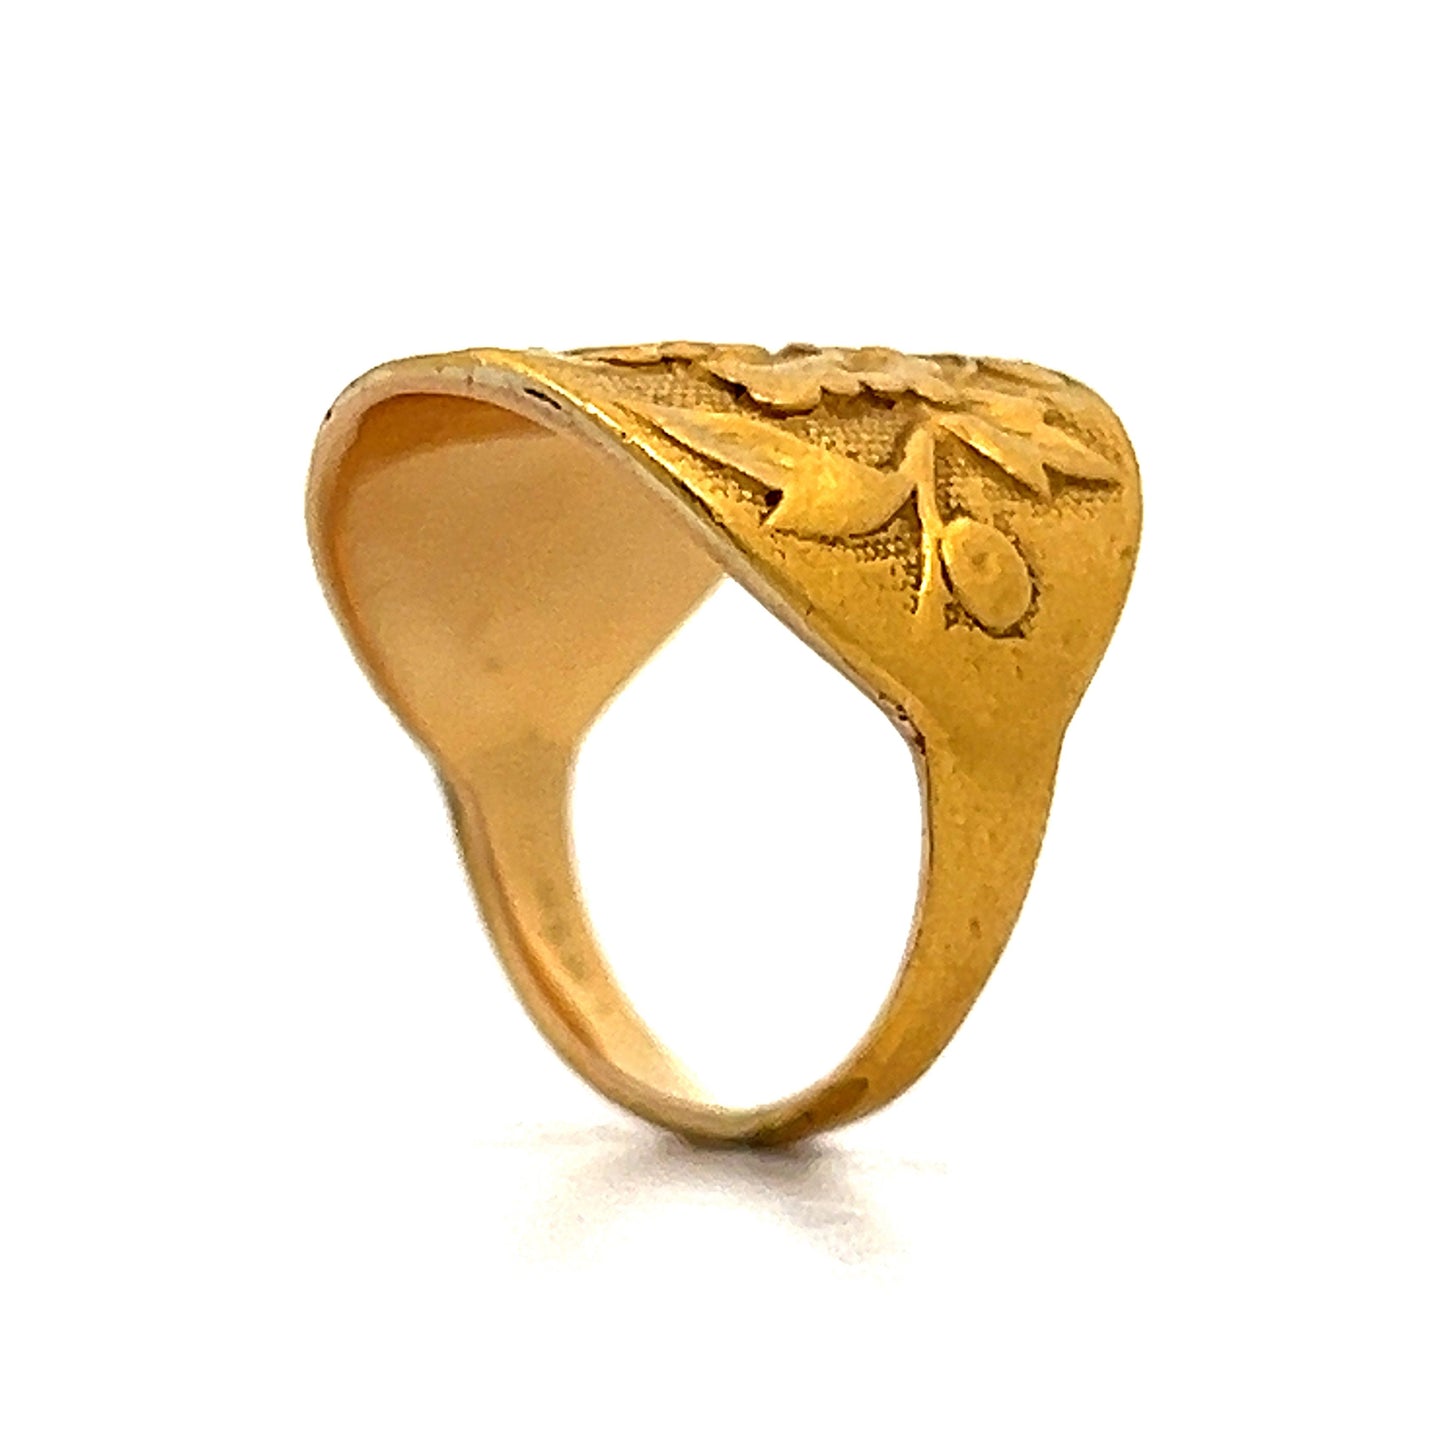 Antique Art Nouveau Engraved Statement Ring in 18k Yellow Gold